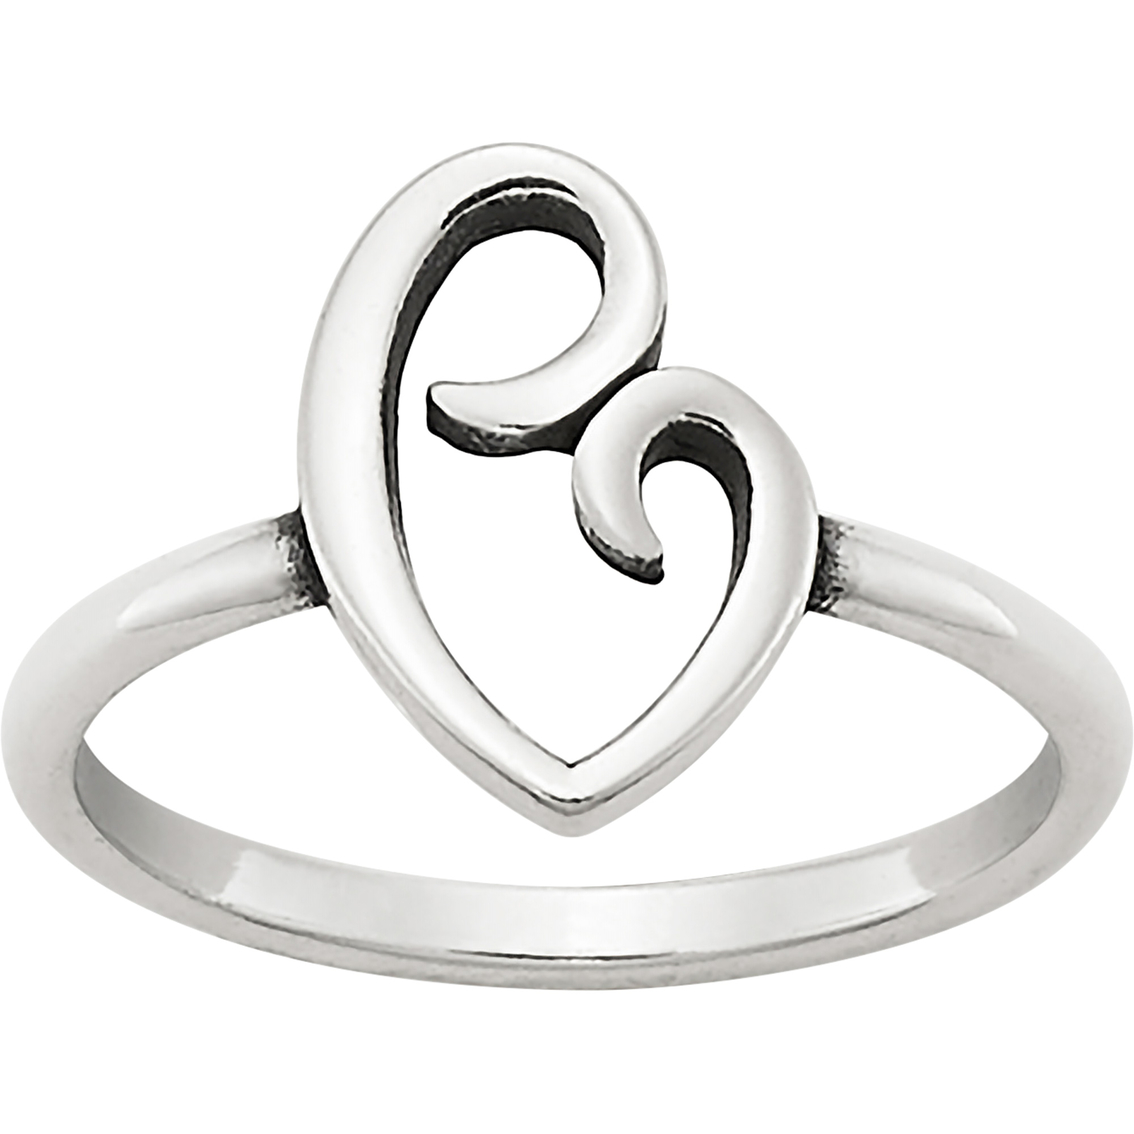 James Avery Delicate Mother's Love Ring Silver Rings Jewelry